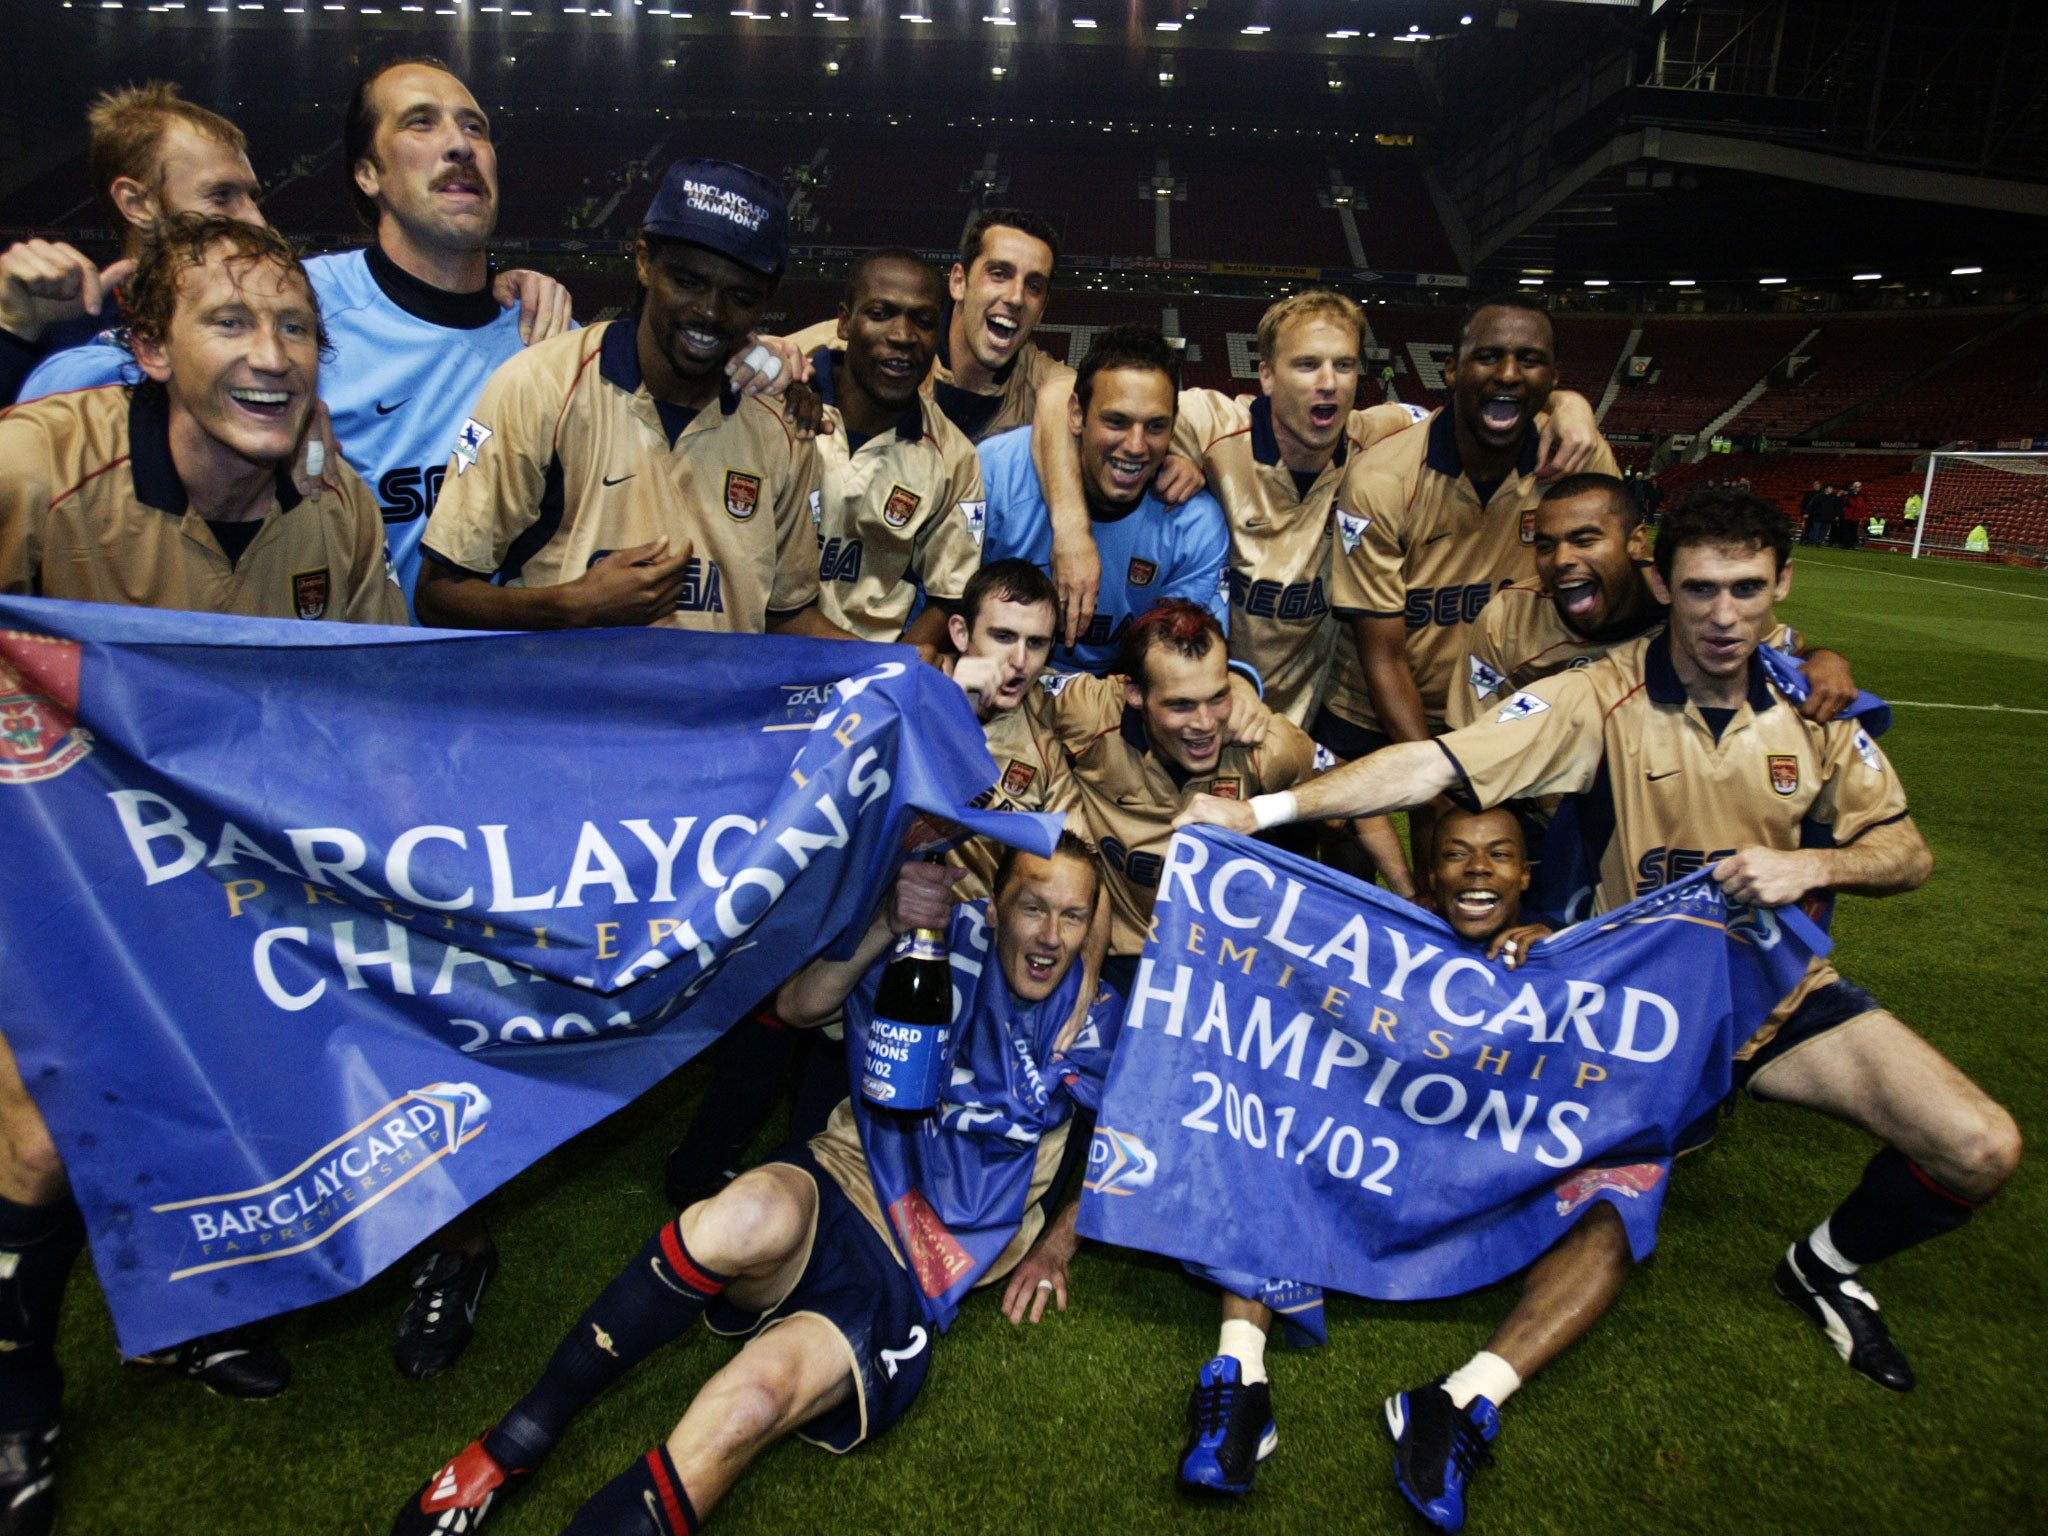 Arsenal celebrate their title triumph at Old Trafford in May 2002 - but can you spot the goalscorer Sylvain Wiltord?